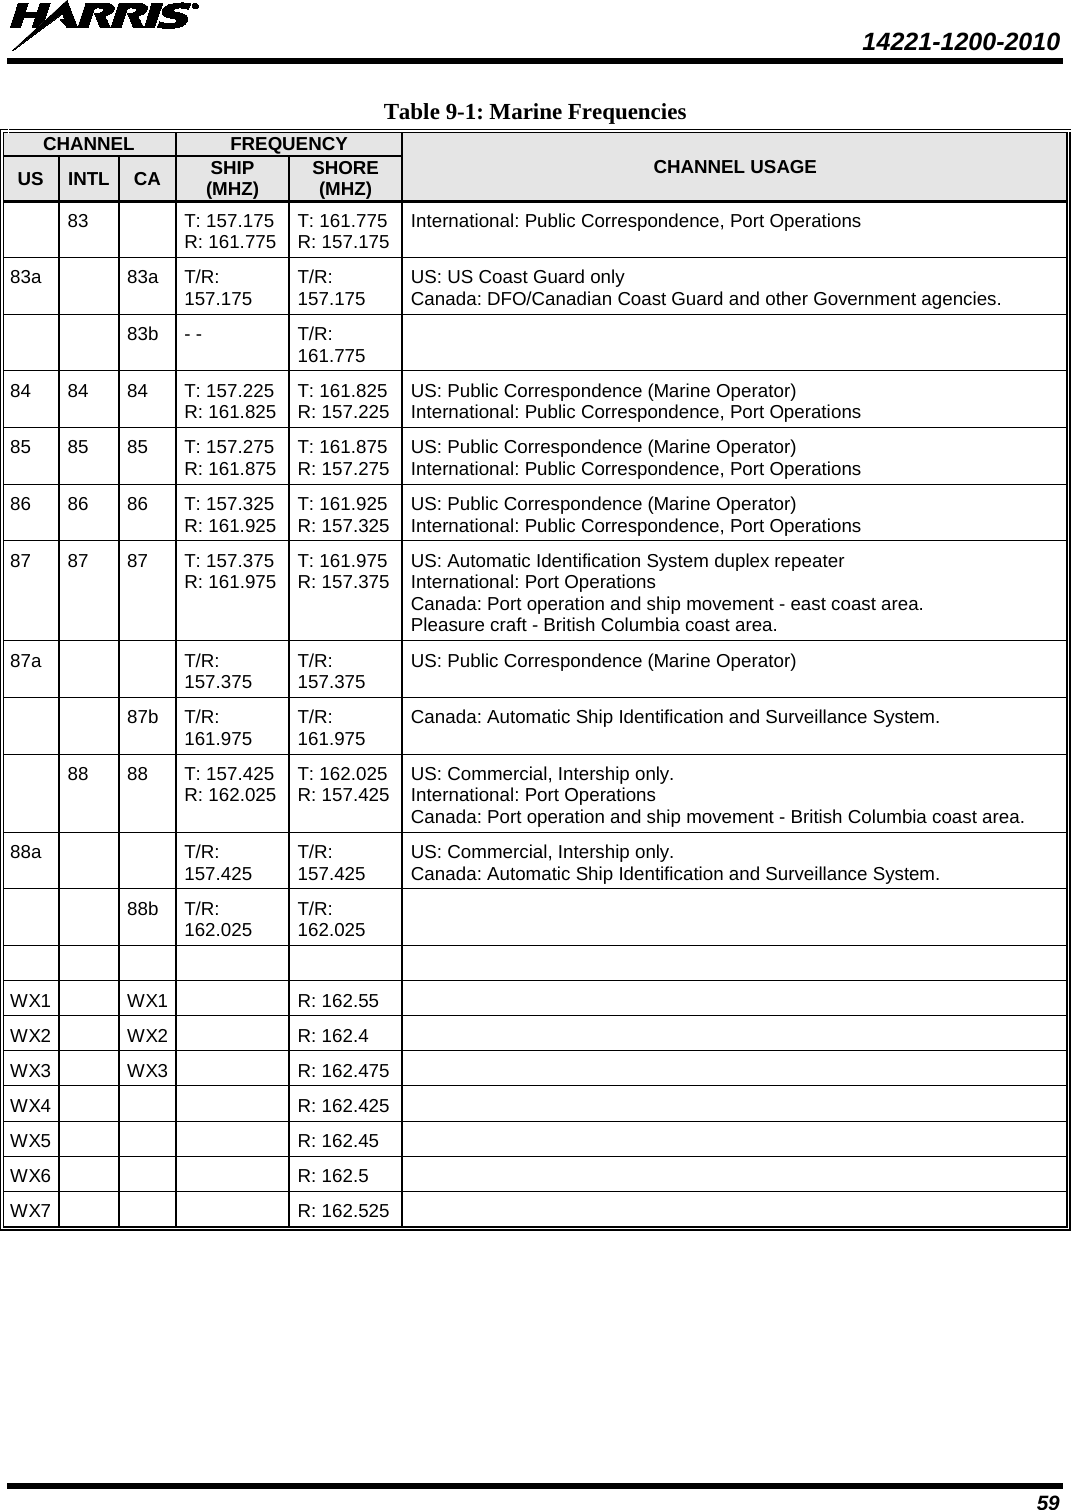  14221-1200-2010 59 Table 9-1: Marine Frequencies CHANNEL FREQUENCY CHANNEL USAGE US INTL CA SHIP (MHZ) SHORE (MHZ)  83  T: 157.175  R: 161.775 T: 161.775 R: 157.175 International: Public Correspondence, Port Operations 83a  83a T/R: 157.175 T/R: 157.175 US: US Coast Guard only Canada: DFO/Canadian Coast Guard and other Government agencies.     83b  - -  T/R: 161.775  84 84 84 T: 157.225  R: 161.825 T: 161.825  R: 157.225 US: Public Correspondence (Marine Operator)  International: Public Correspondence, Port Operations 85 85 85 T: 157.275 R: 161.875 T: 161.875  R: 157.275 US: Public Correspondence (Marine Operator)  International: Public Correspondence, Port Operations 86 86 86 T: 157.325  R: 161.925 T: 161.925 R: 157.325 US: Public Correspondence (Marine Operator)  International: Public Correspondence, Port Operations 87 87 87 T: 157.375  R: 161.975 T: 161.975 R: 157.375 US: Automatic Identification System duplex repeater International: Port Operations Canada: Port operation and ship movement - east coast area. Pleasure craft - British Columbia coast area. 87a   T/R: 157.375 T/R: 157.375 US: Public Correspondence (Marine Operator)      87b T/R: 161.975 T/R: 161.975 Canada: Automatic Ship Identification and Surveillance System.  88 88 T: 157.425  R: 162.025 T: 162.025 R: 157.425 US: Commercial, Intership only.  International: Port Operations Canada: Port operation and ship movement - British Columbia coast area. 88a   T/R: 157.425 T/R: 157.425 US: Commercial, Intership only.  Canada: Automatic Ship Identification and Surveillance System.     88b T/R: 162.025 T/R: 162.025        WX1  WX1  R: 162.55  WX2  WX2  R: 162.4  WX3  WX3  R: 162.475  WX4    R: 162.425  WX5    R: 162.45  WX6    R: 162.5  WX7    R: 162.525  